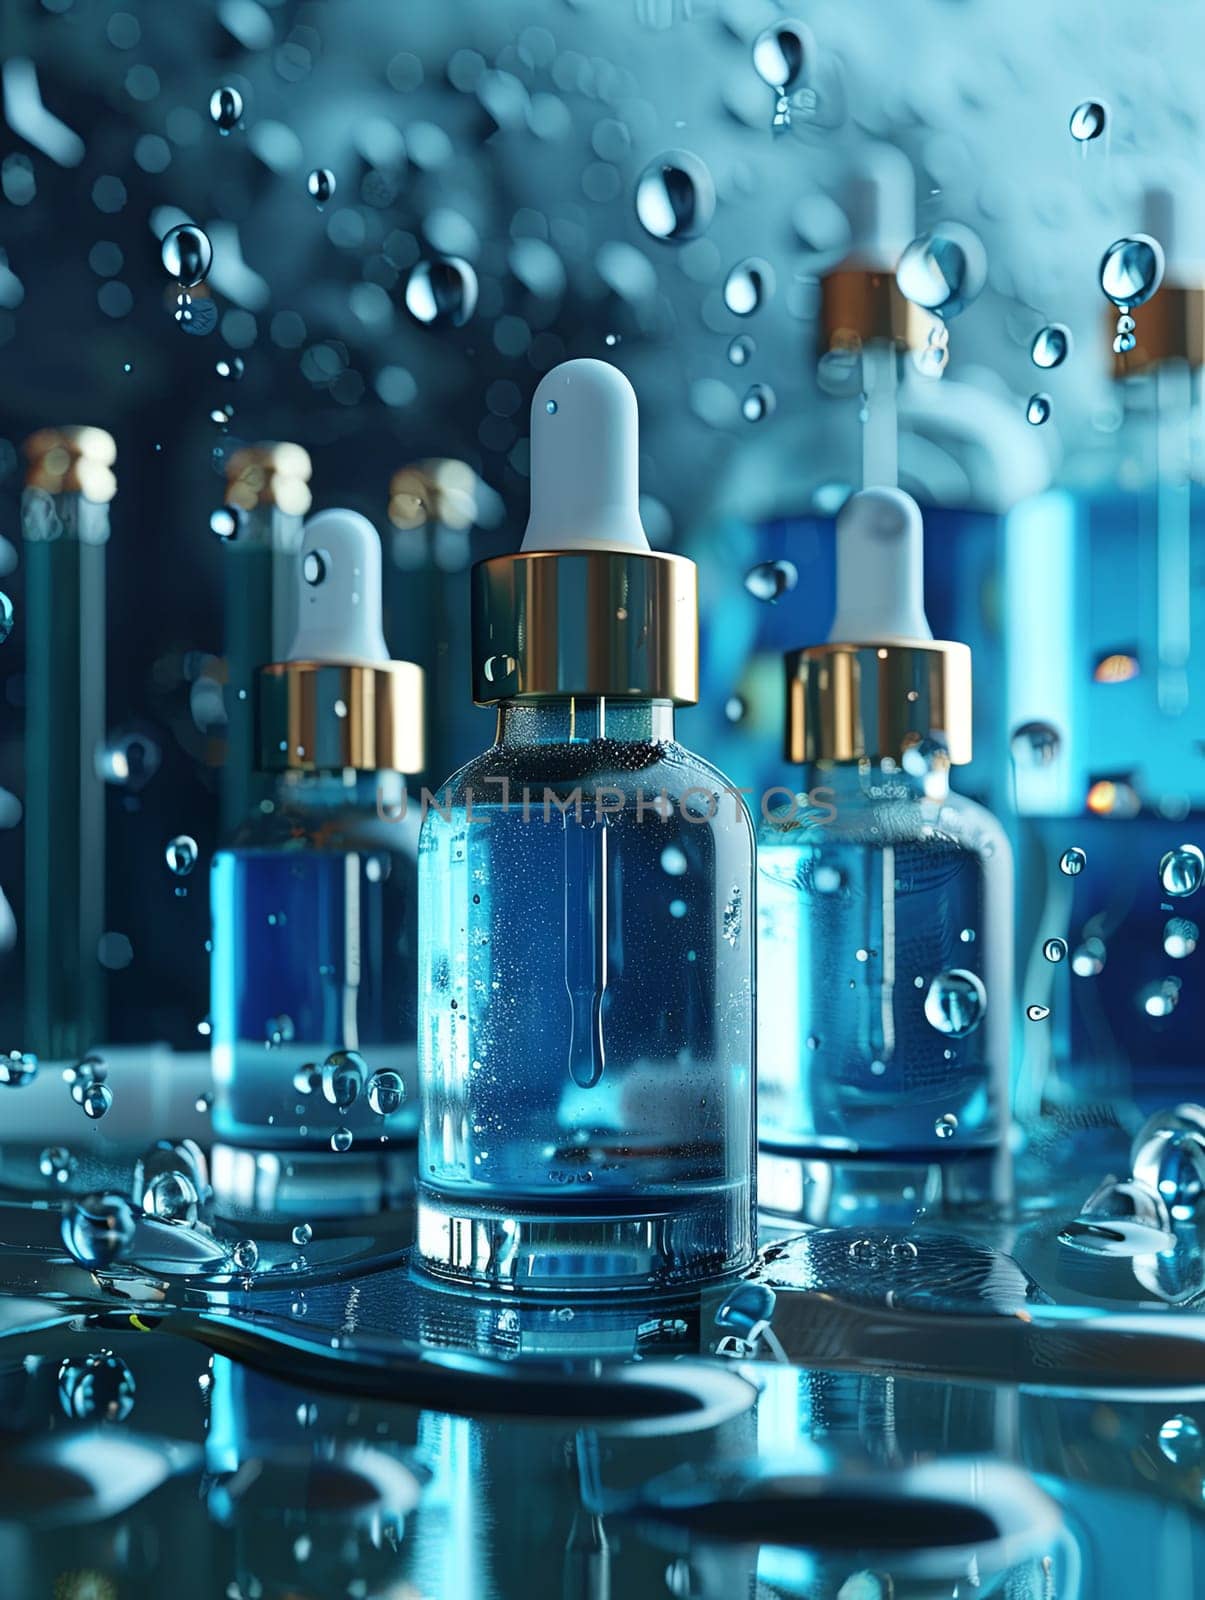 Glass bottles with serums and droplets in a laboratory setting.